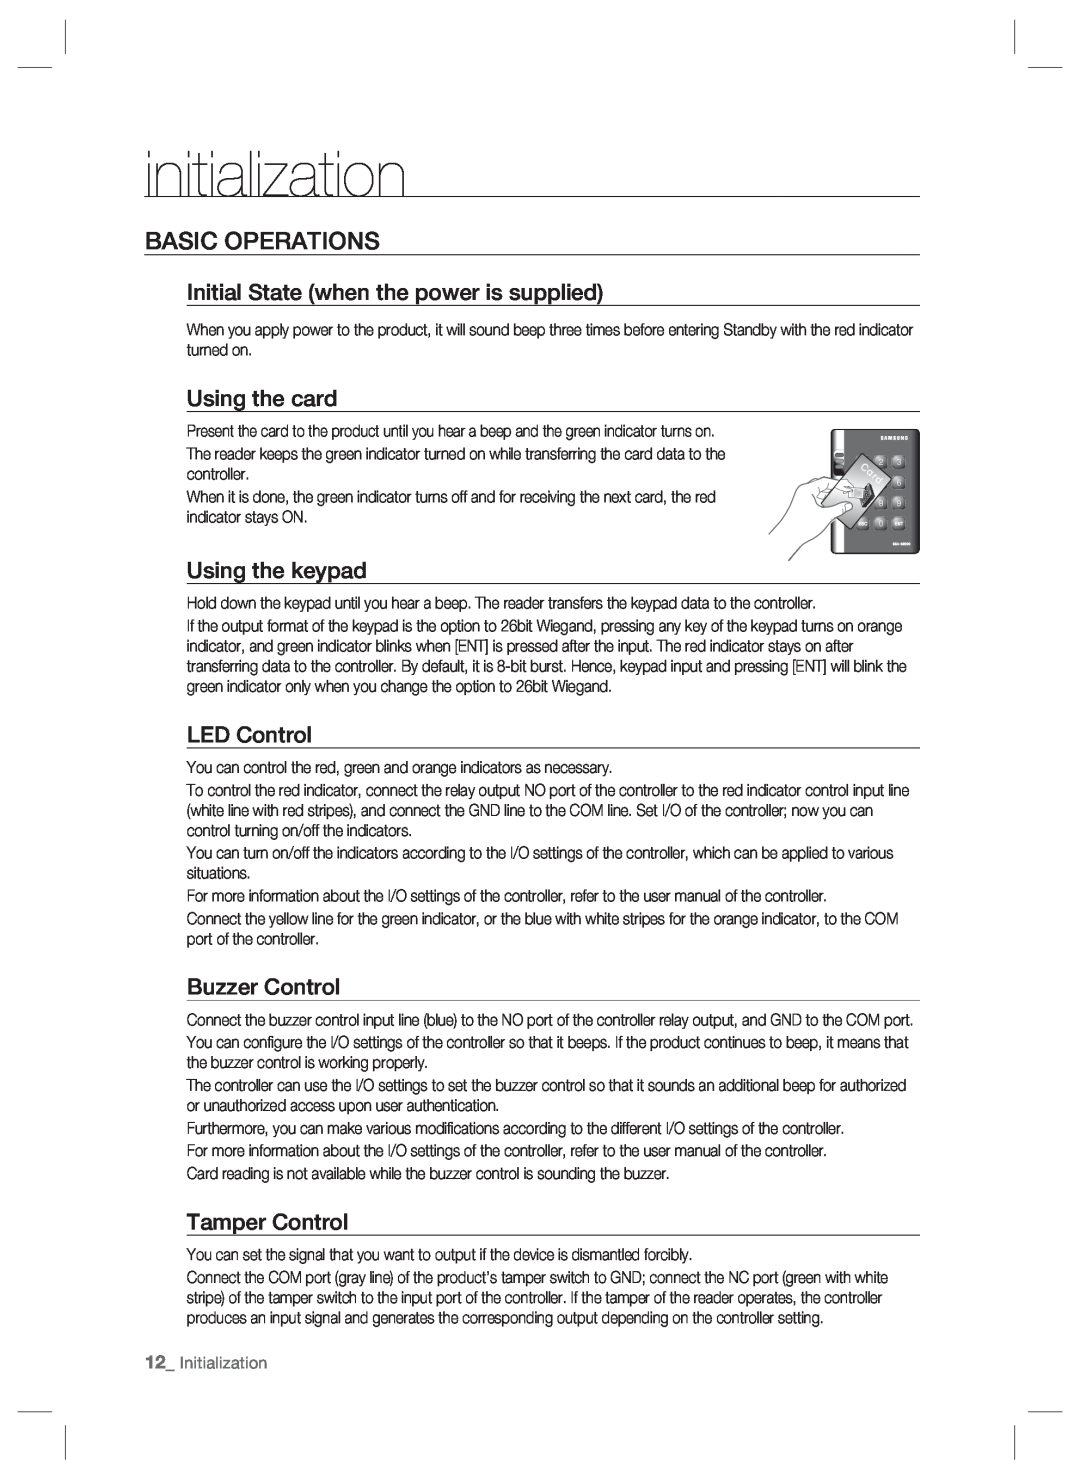 Samsung SSA-R2001 user manual Basic Operations, Initial State when the power is supplied, Using the card, Using the keypad 